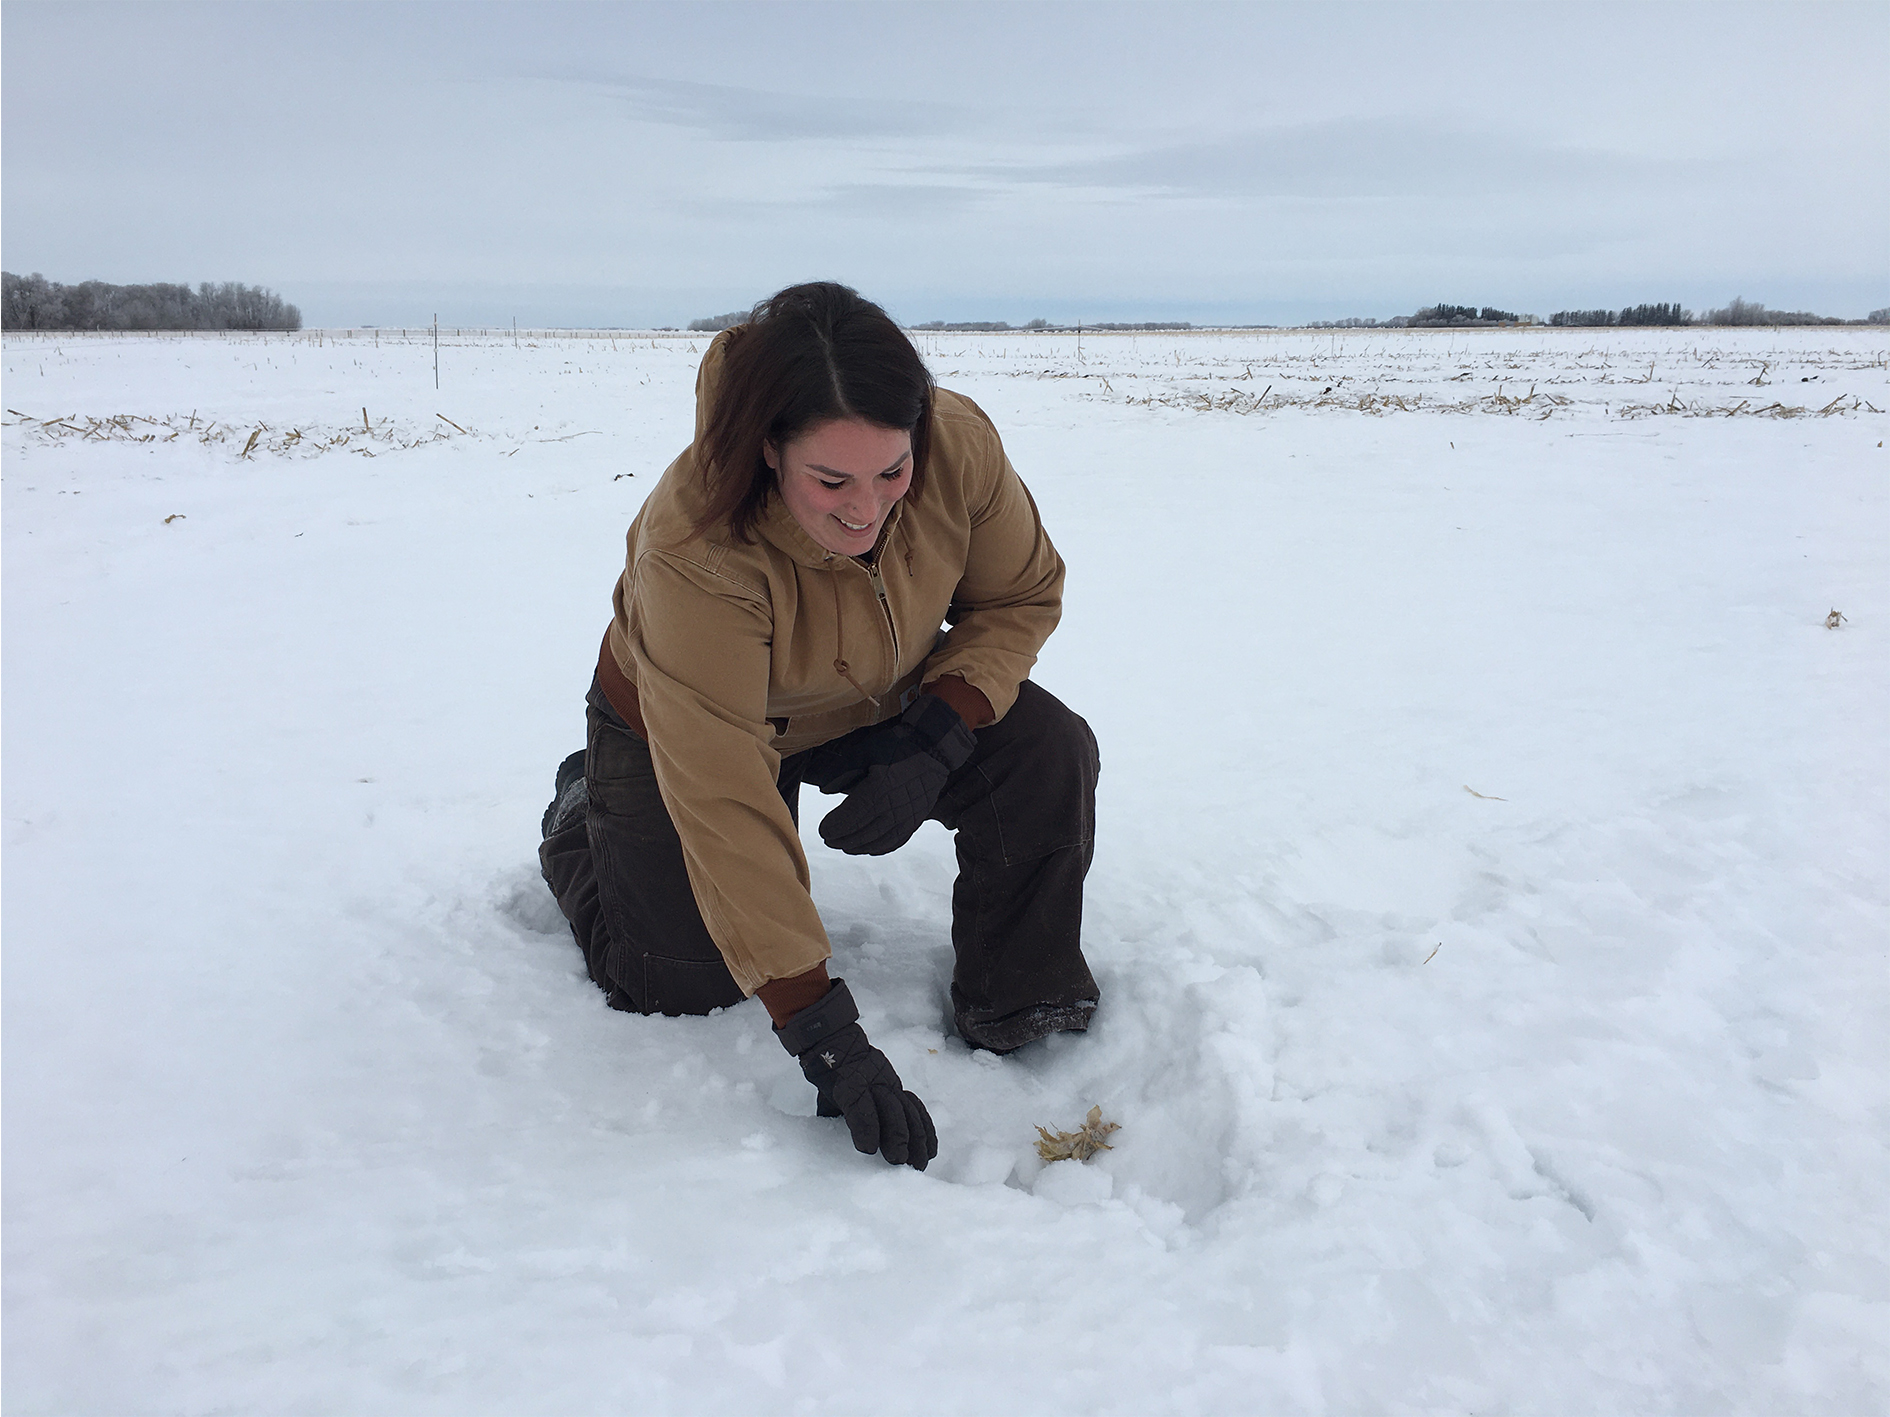 Winter grazing feed study hss been an eye-opening experience for Rachel Carey, who was raised in Texas.